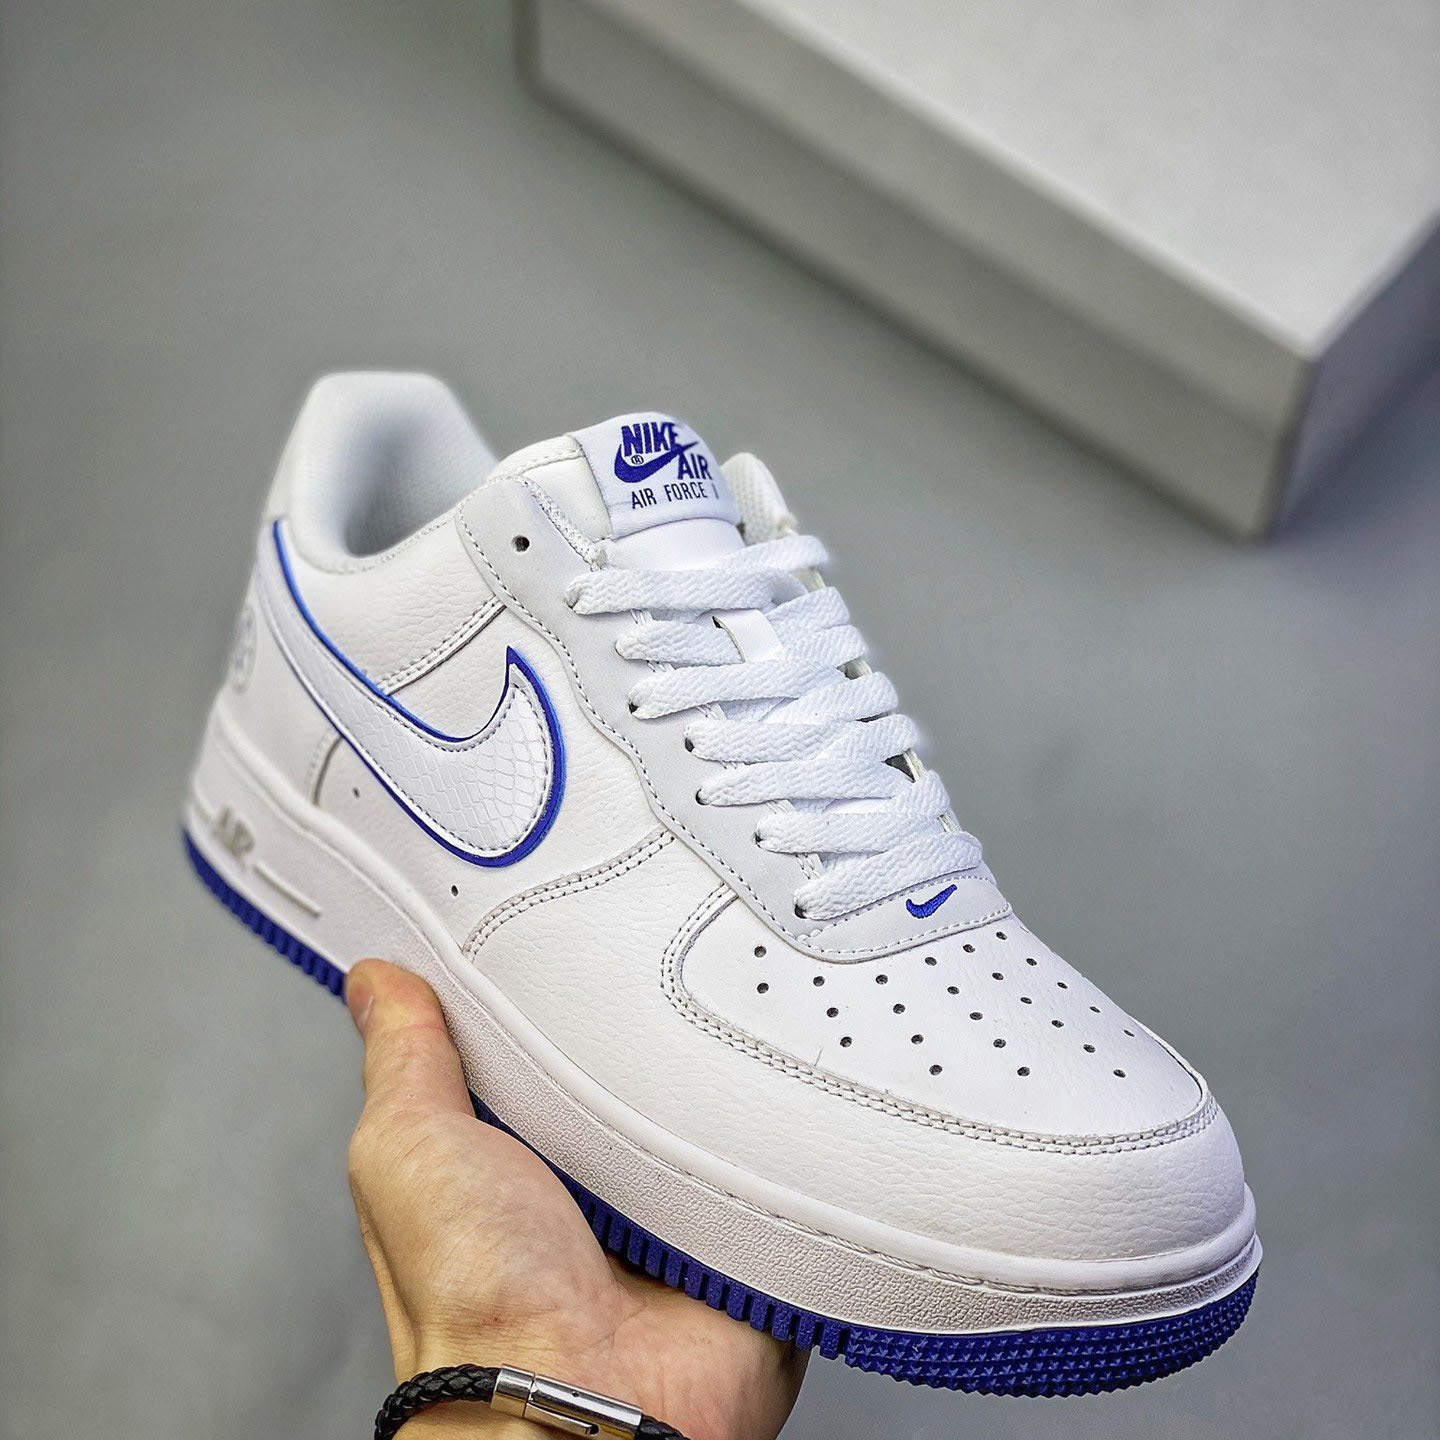 Air Force Low Tops - Airforce Military